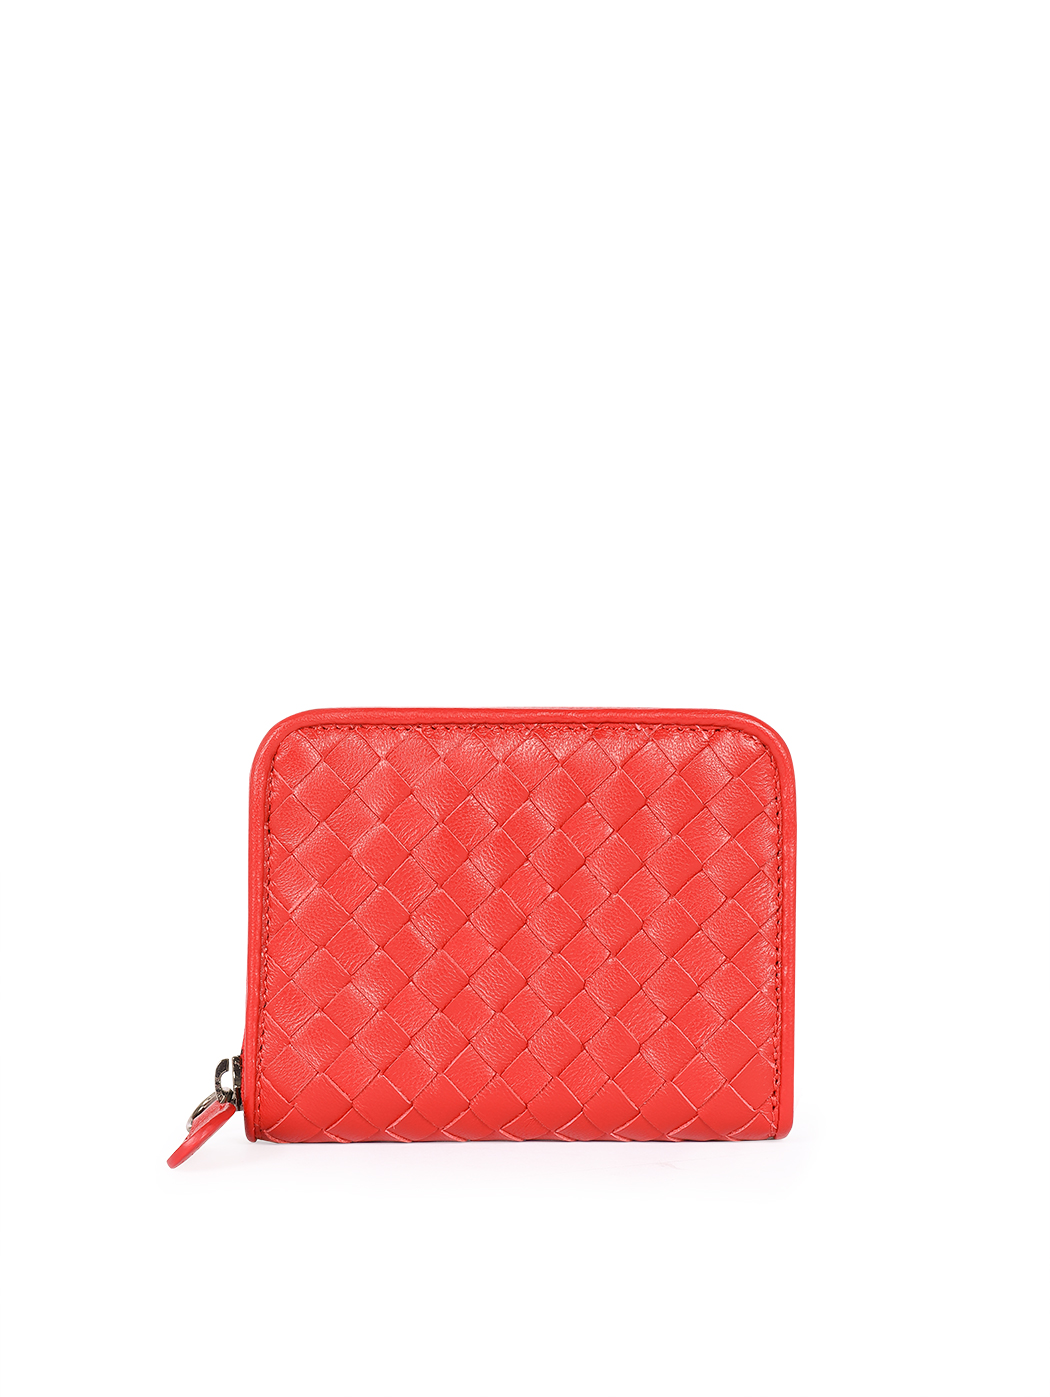 Compact zip-around wallet in red woven leather